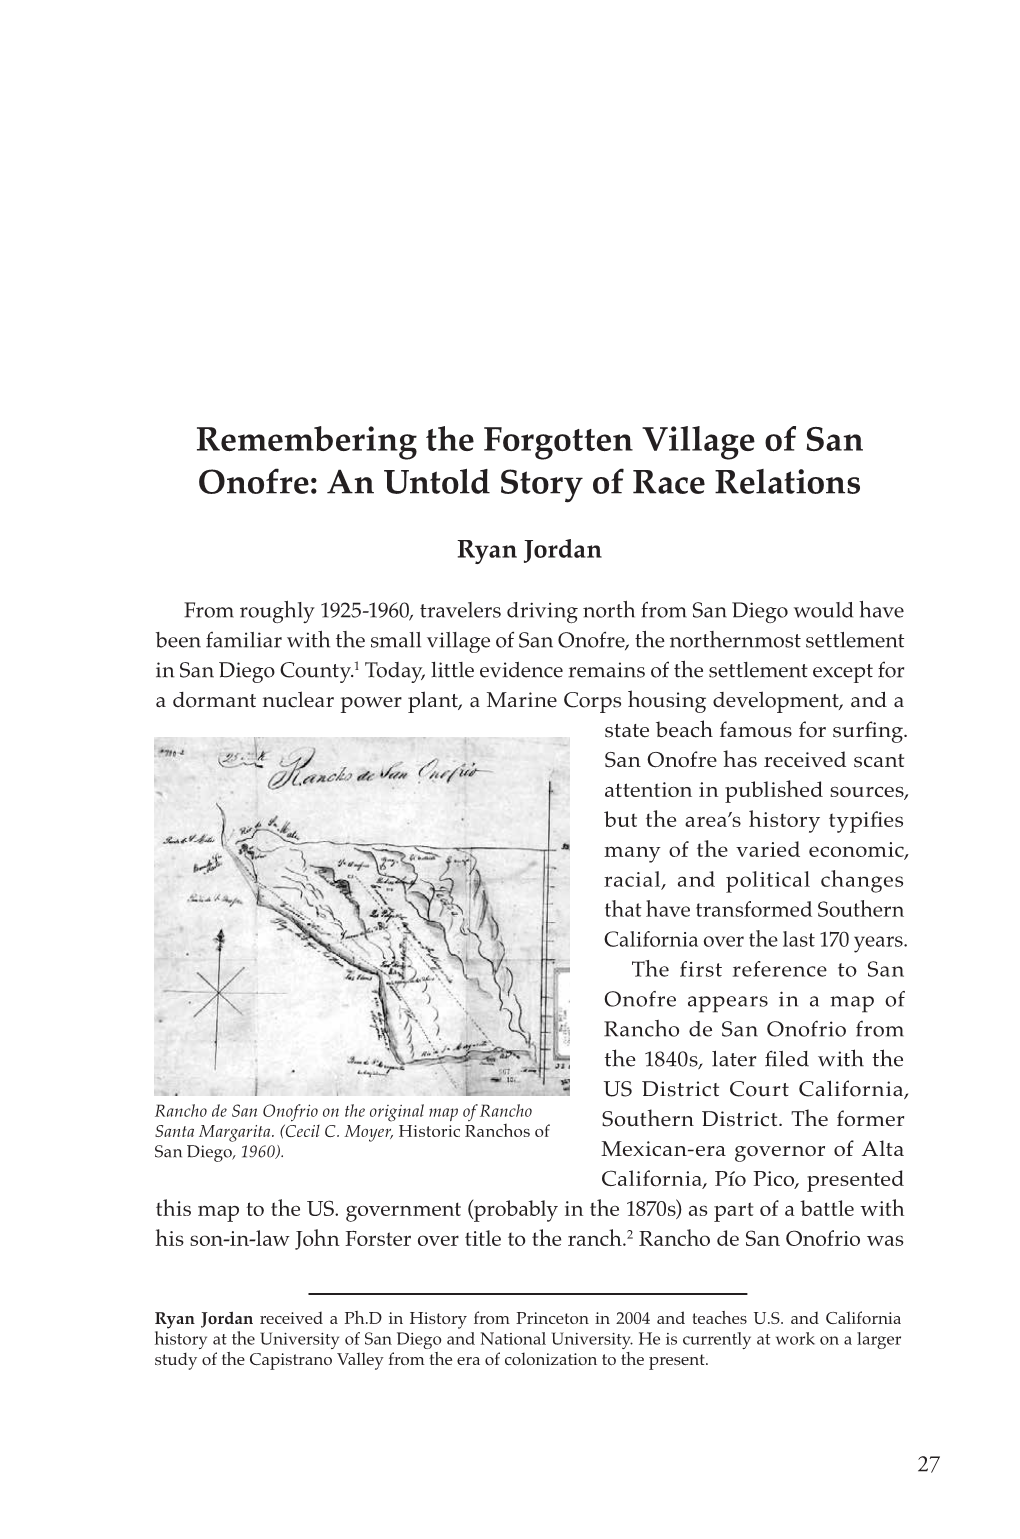 Remembering the Forgotten Village of San Onofre: an Untold Story of Race Relations